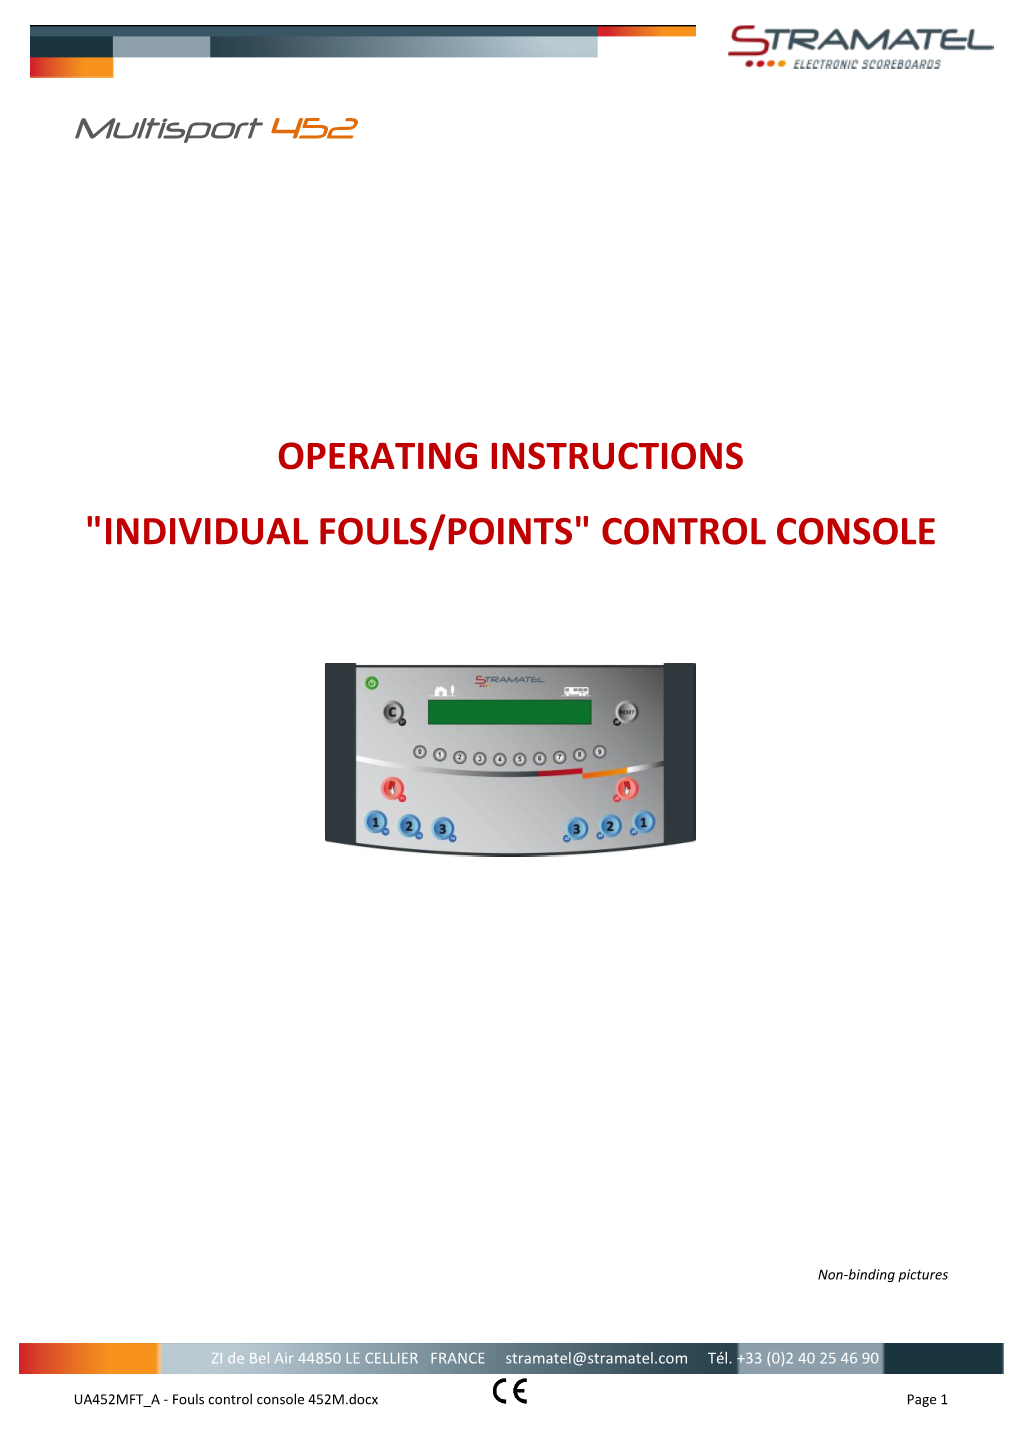 Operating Instructions "Individual Fouls/Points" Control Console